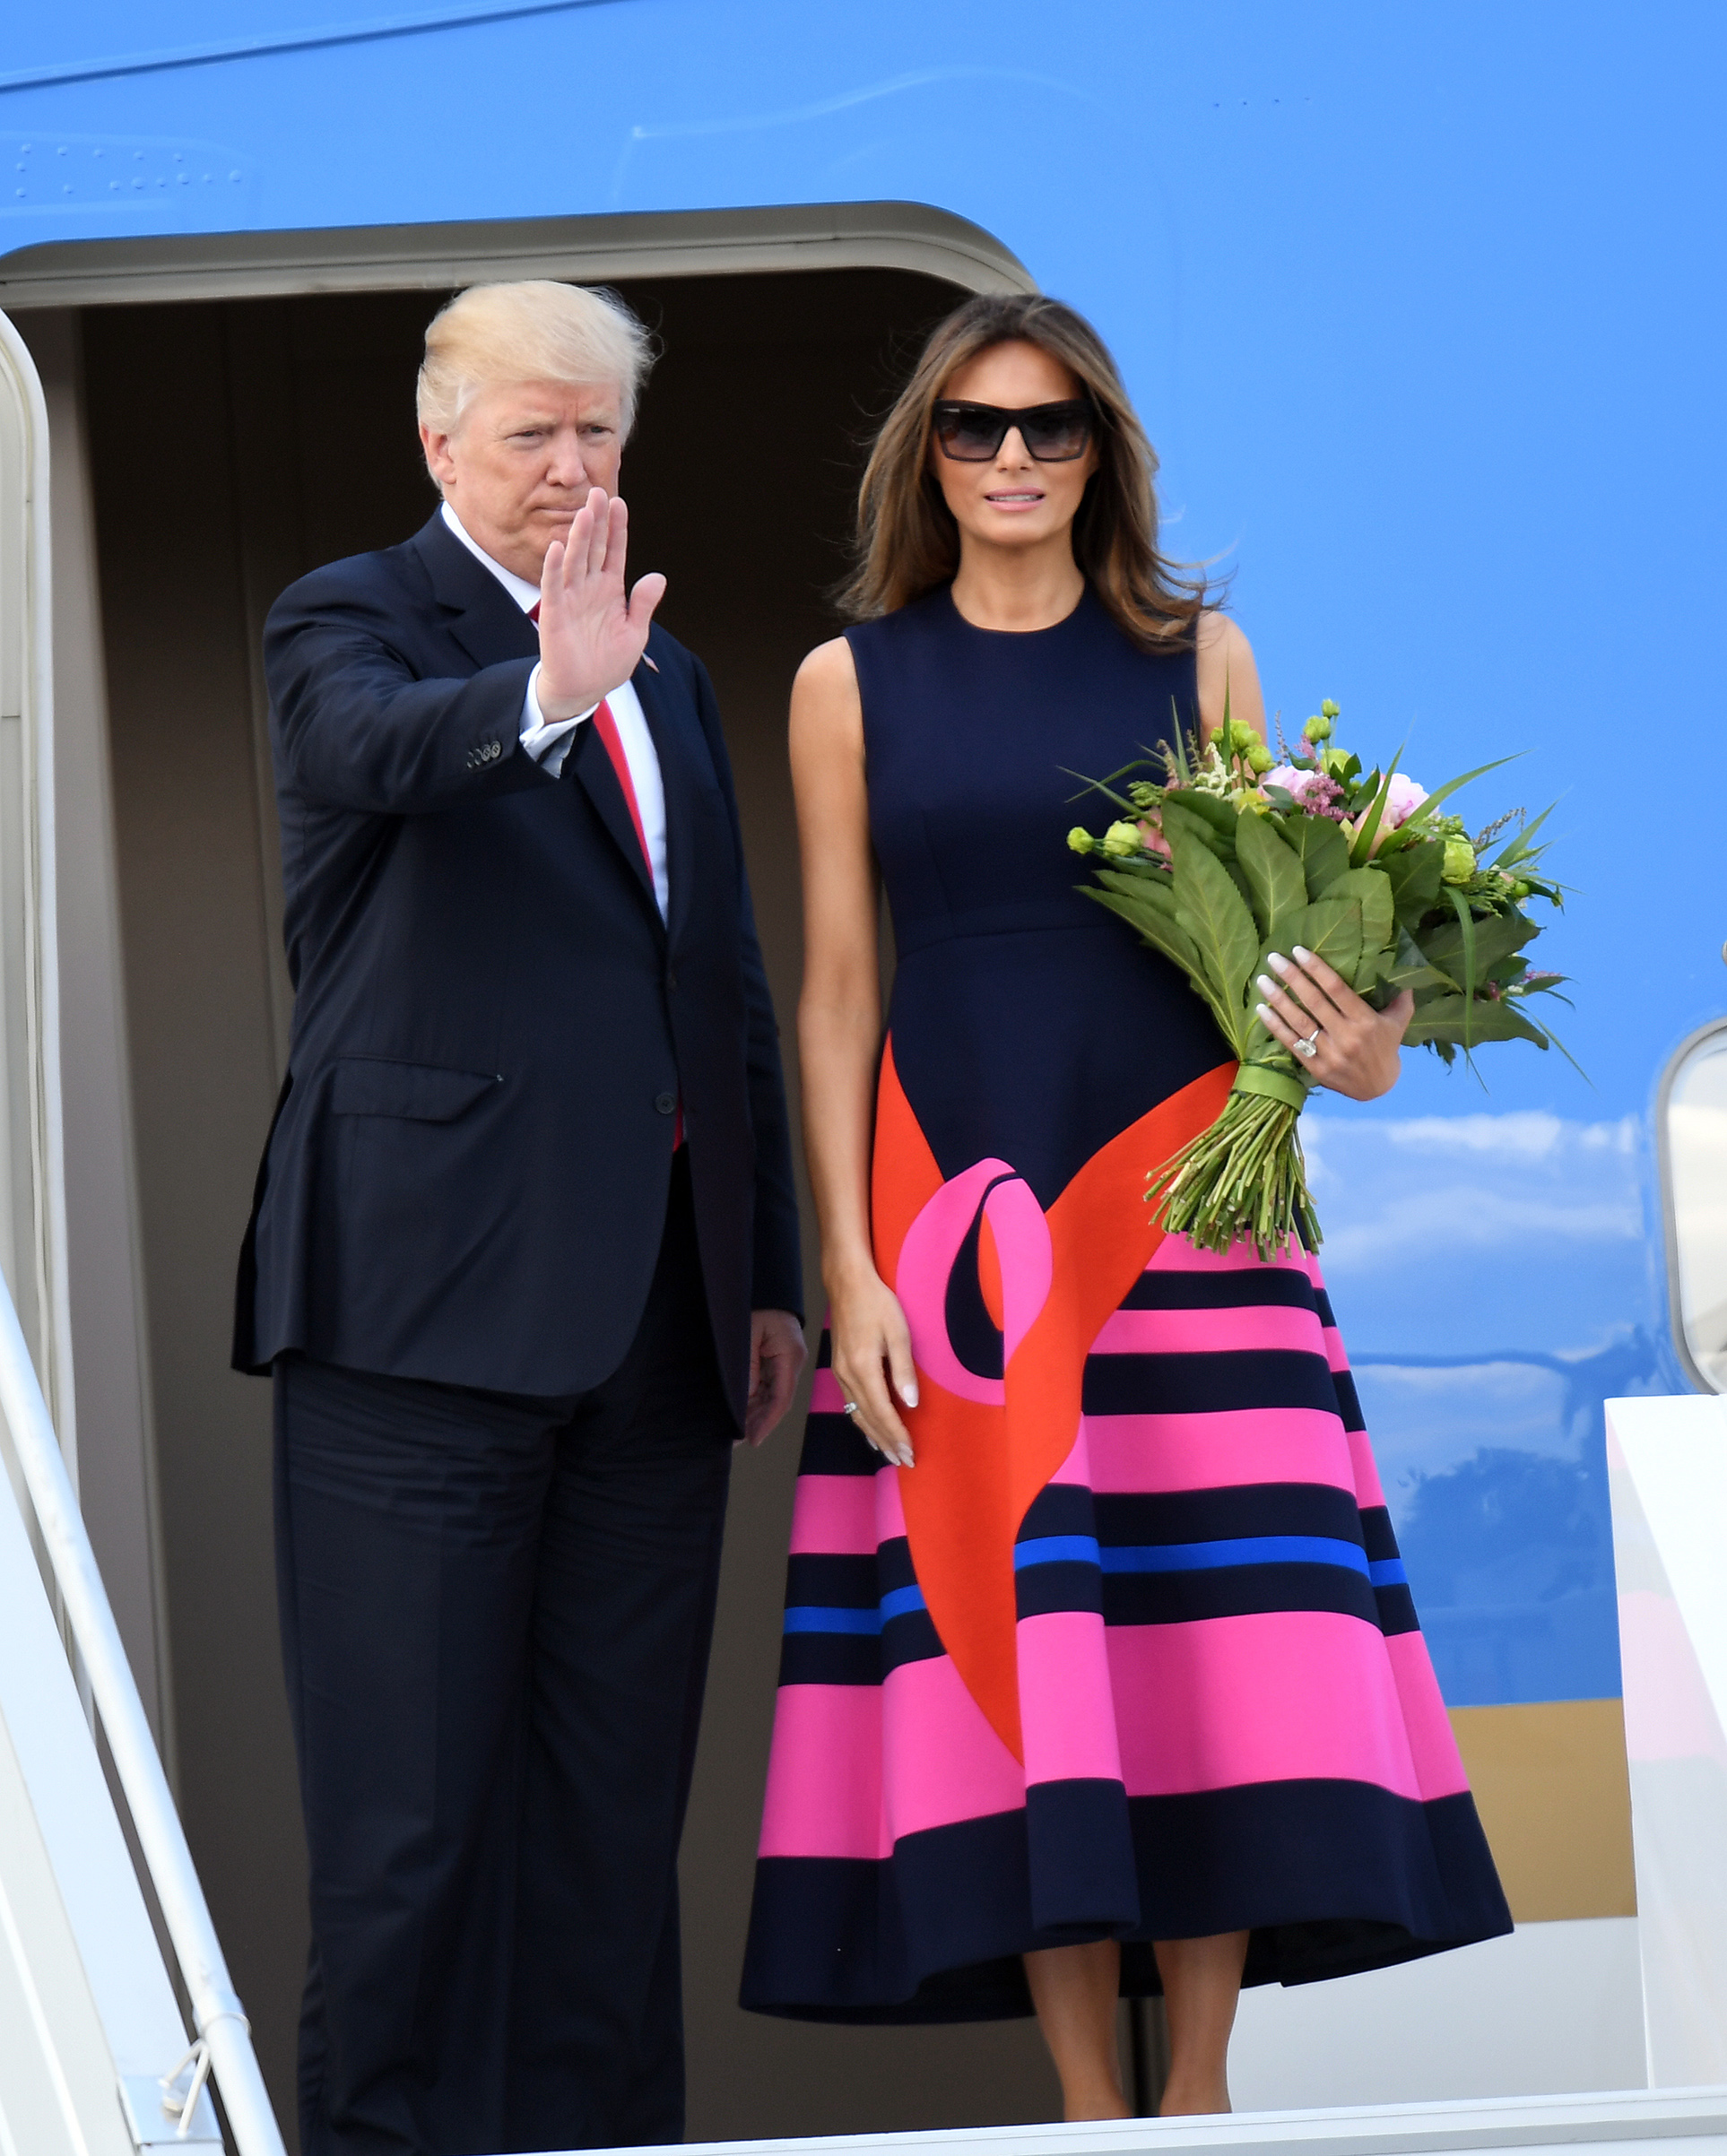 President Donald Trump and the first lady Melania Trump wearing a midi-length Delpozo dress depart from Poland on July 06, 2017 in Warsaw, Poland.